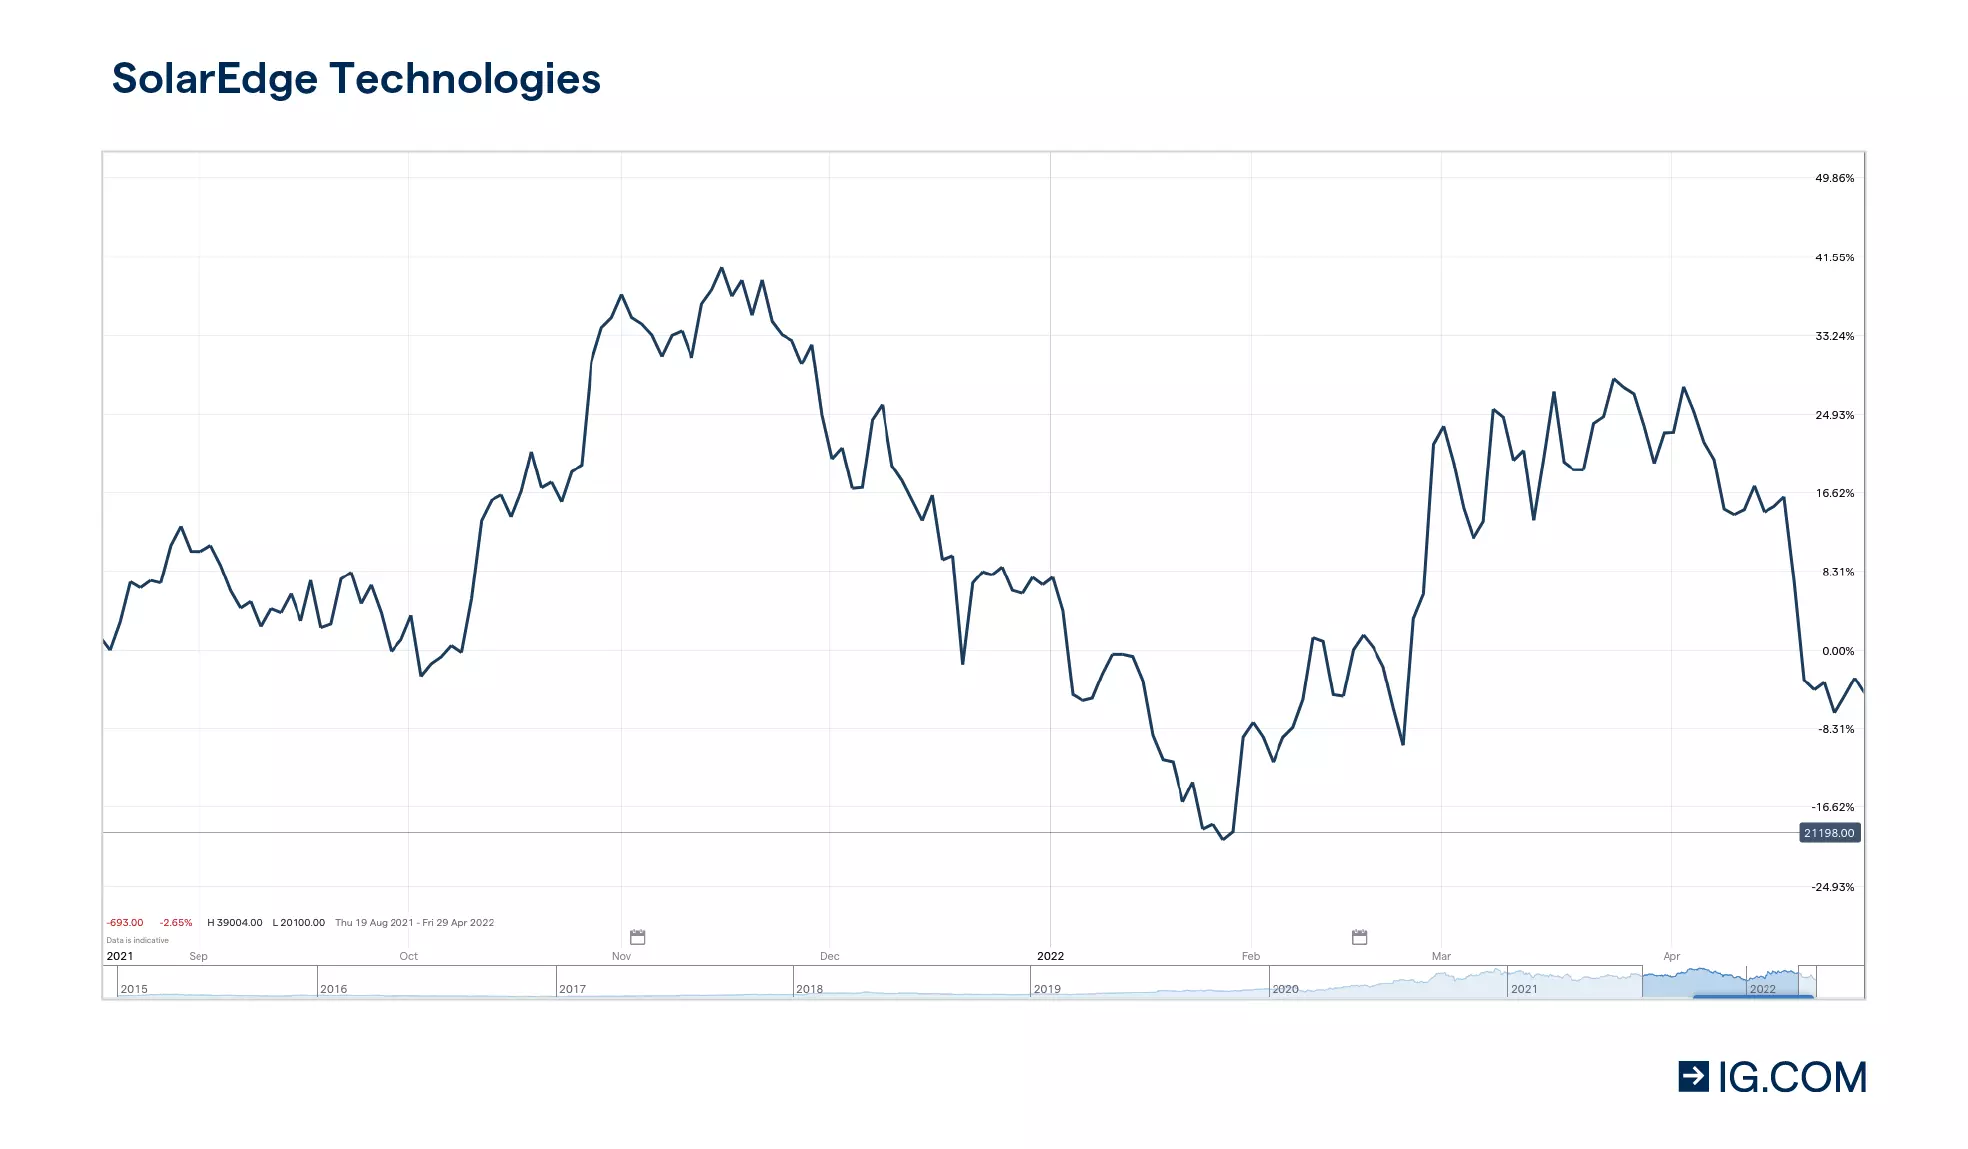 The chart shows SolarEdge Technologies stock over a one-year timeline peaking at 389.71 in November 2021 then dropped slightly, as well as the April 2022 share price of 315.41.